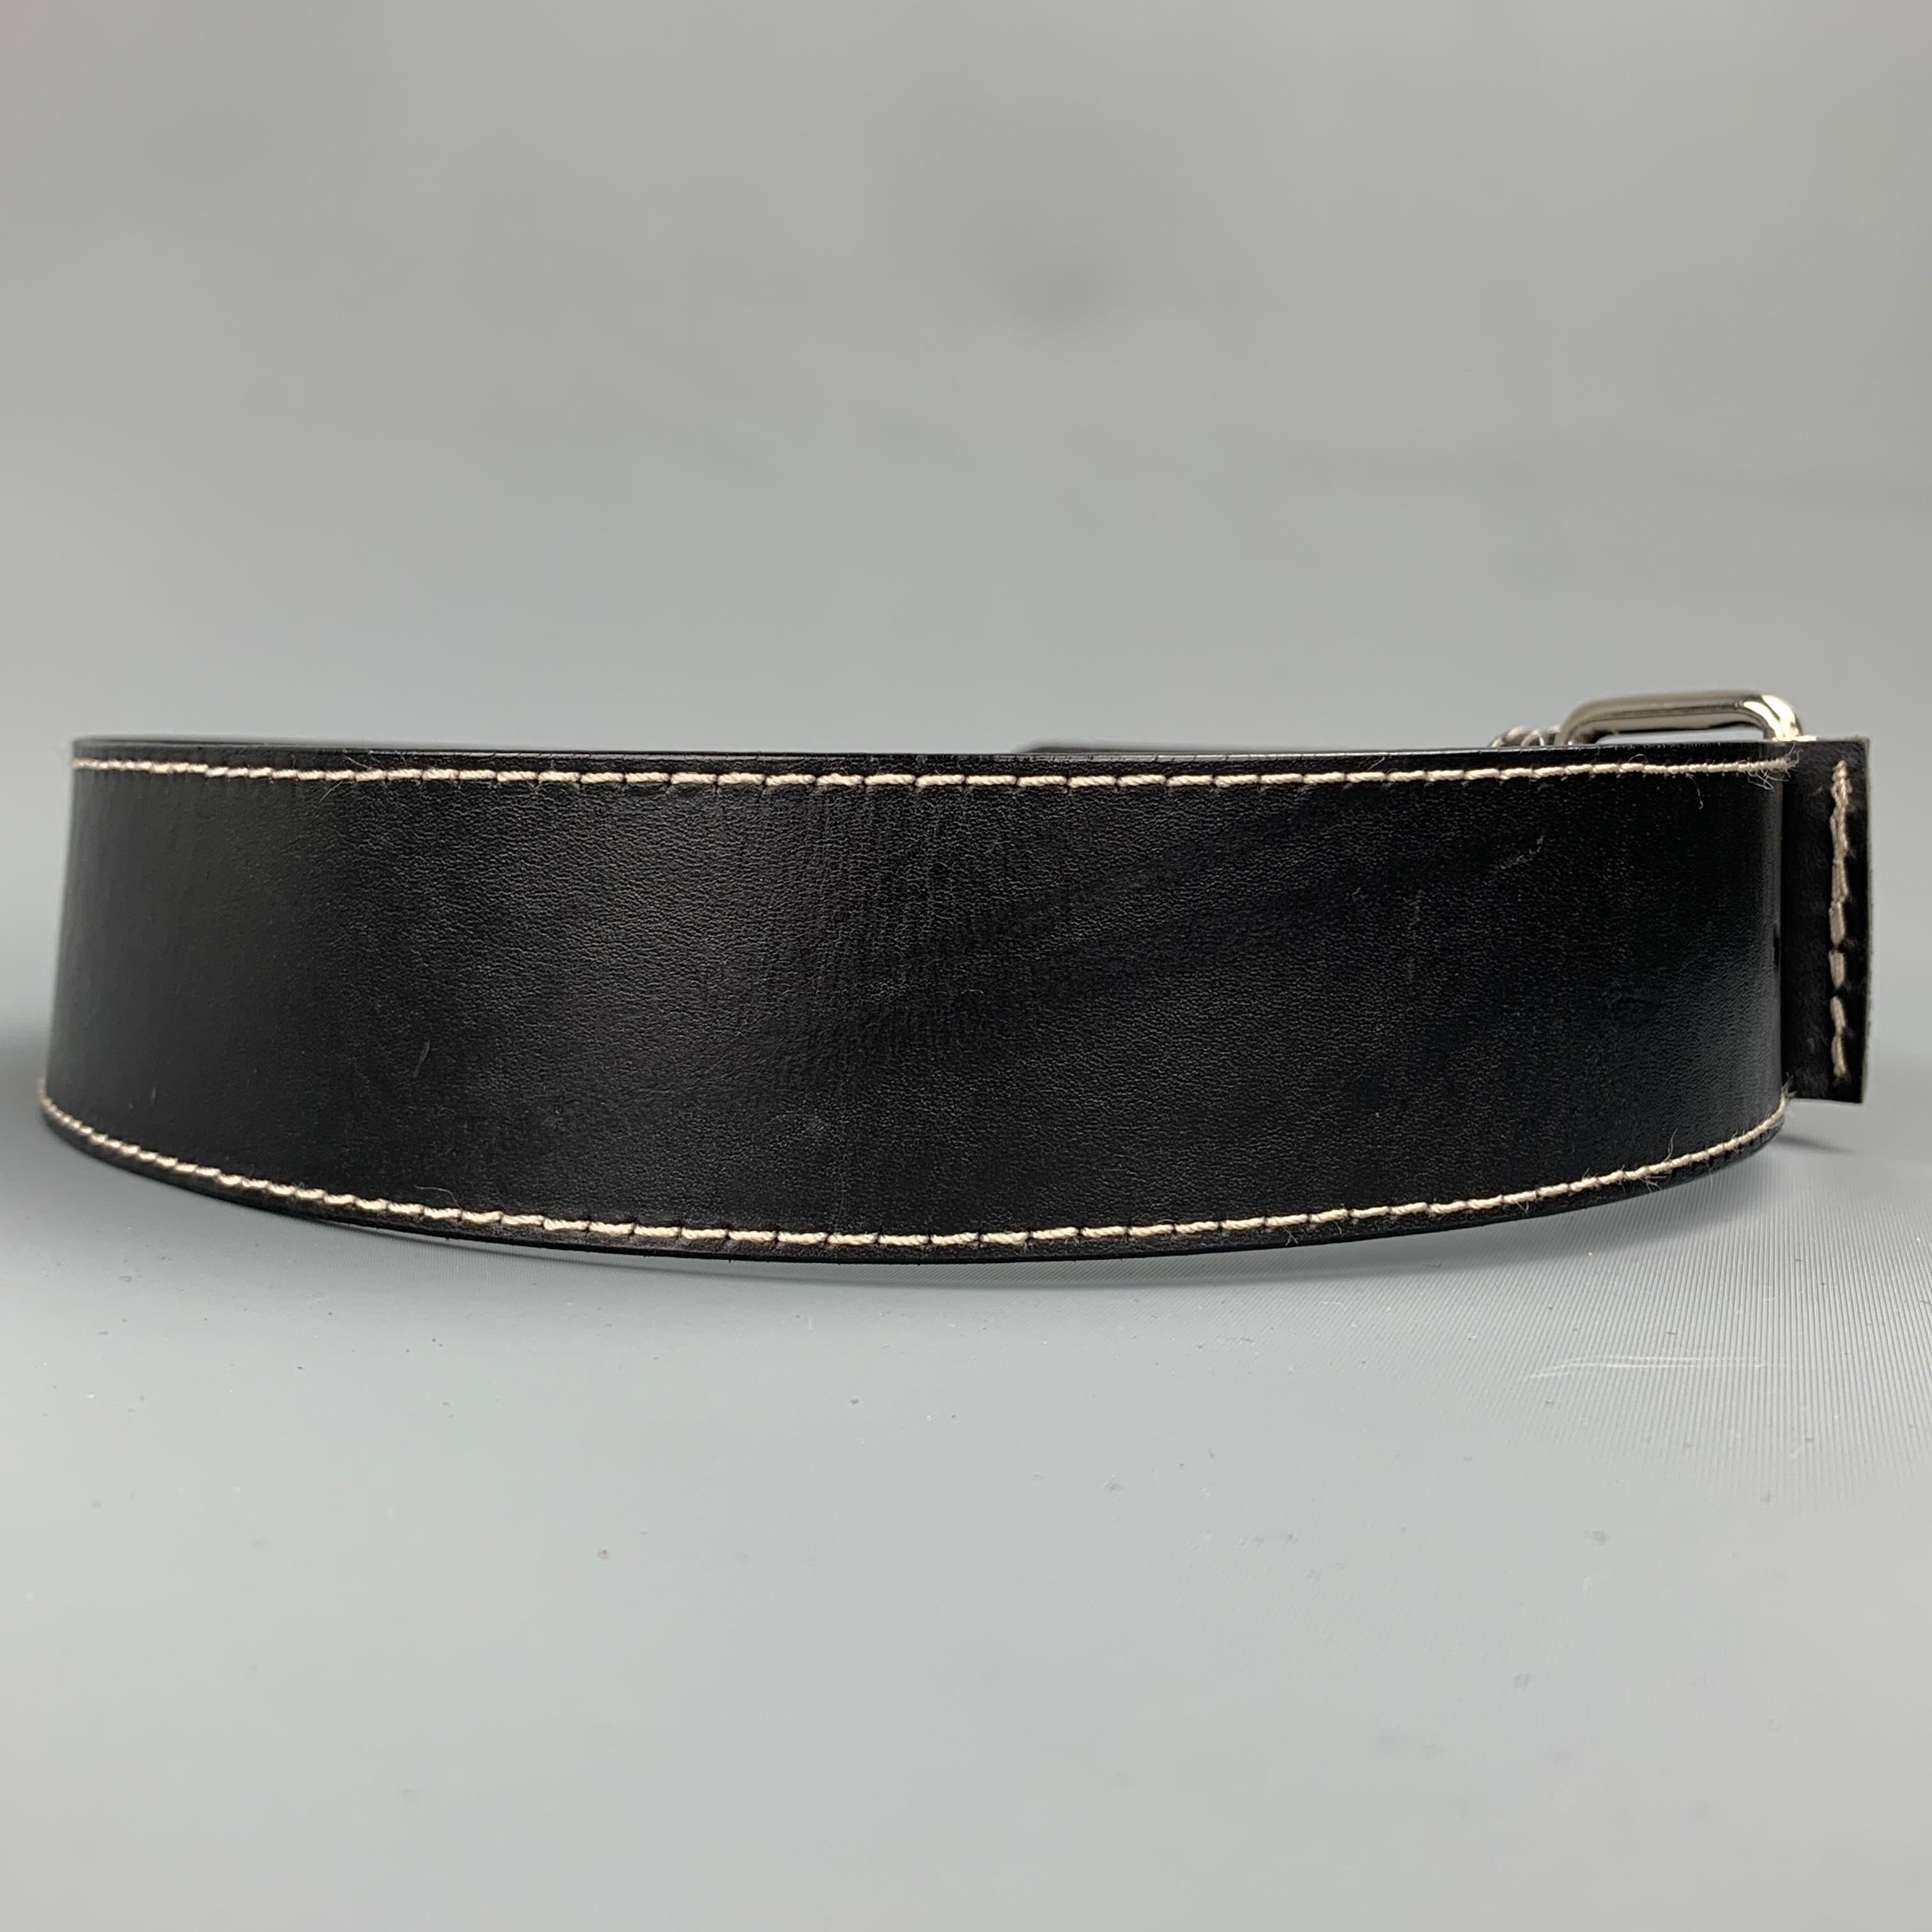 IVAN GRUNDAHL belt comes i a black leather with contrast stitching featuring a silver tone buckle.

Very Good Pre-Owned Condition.
Marked: 80

Length: 38 in. 
Width: 2 in. 
Fits: 28 in. - 32 in. 
Buckle: 1.5 in. 